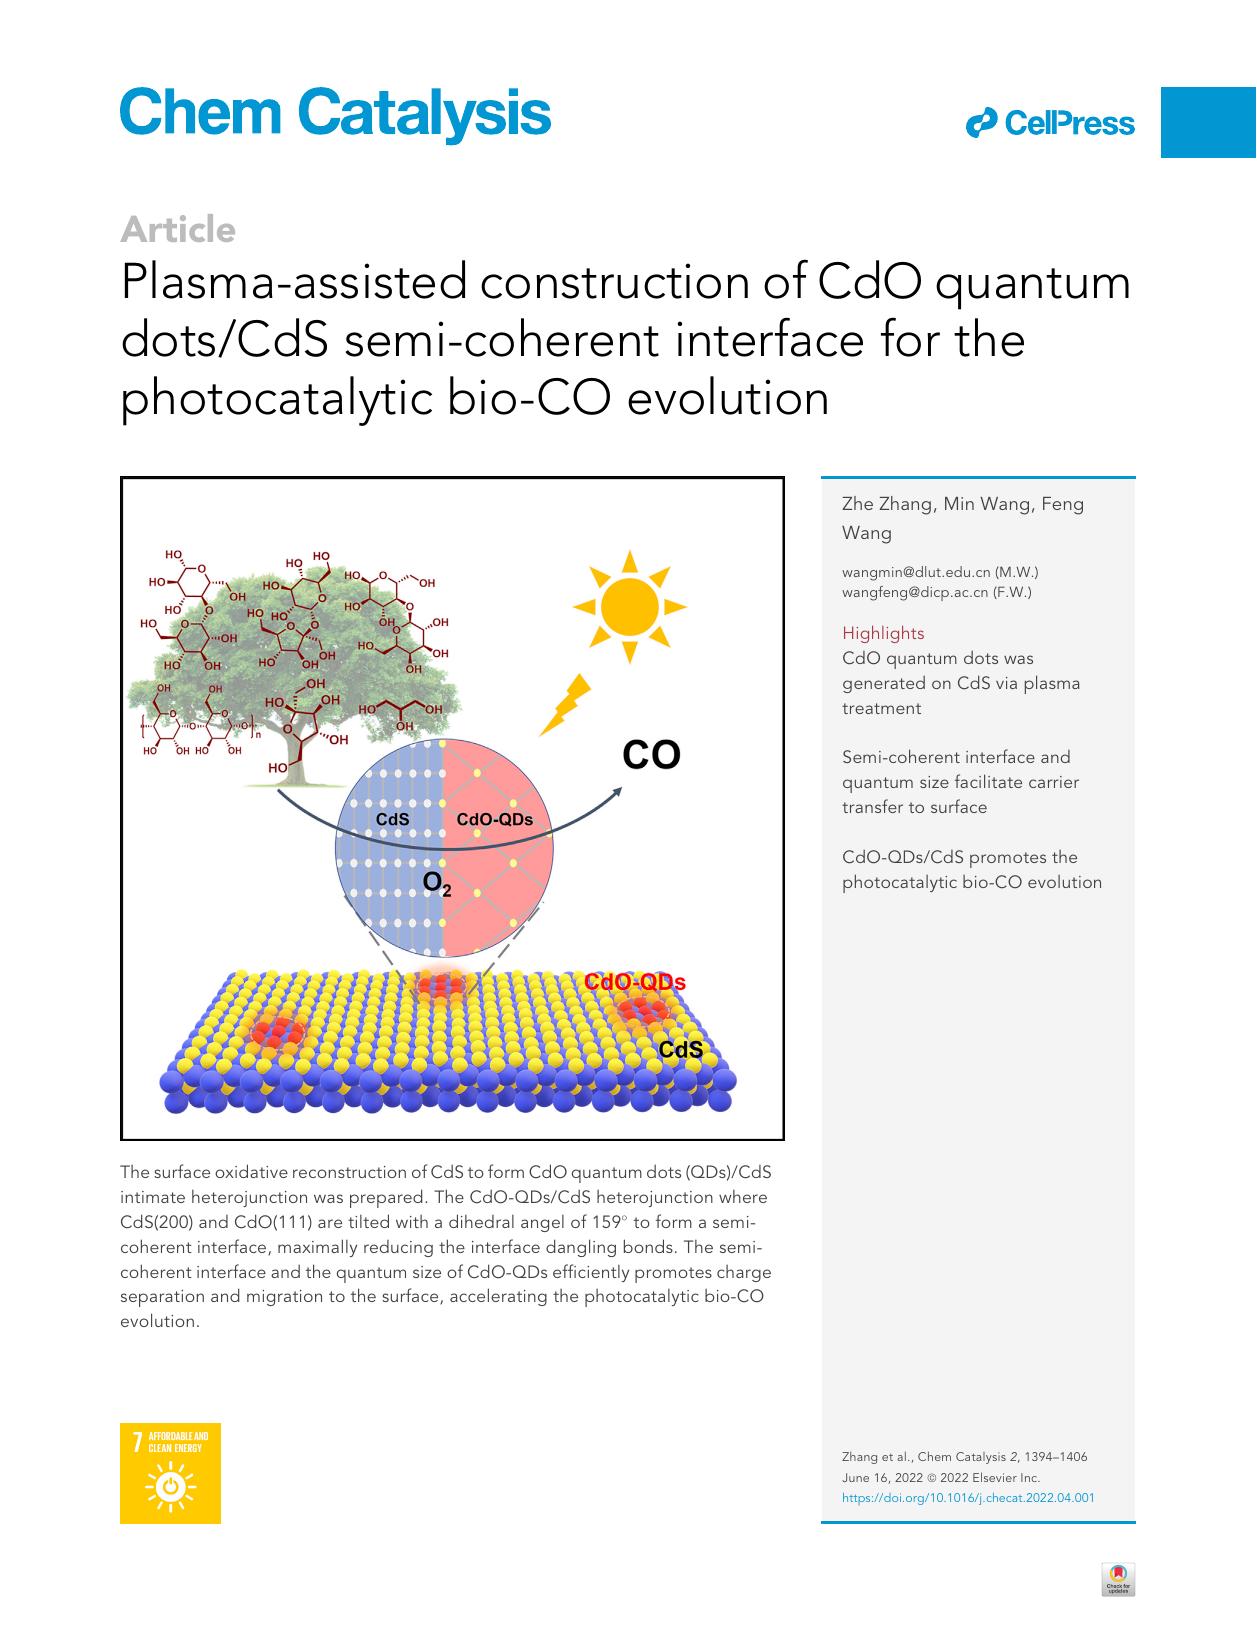 Plasma-assisted construction of CdO quantum dotsCdS semi-coherent interface for the photocatalytic bio-CO evolution by Zhe Zhang & Min Wang & Feng Wang